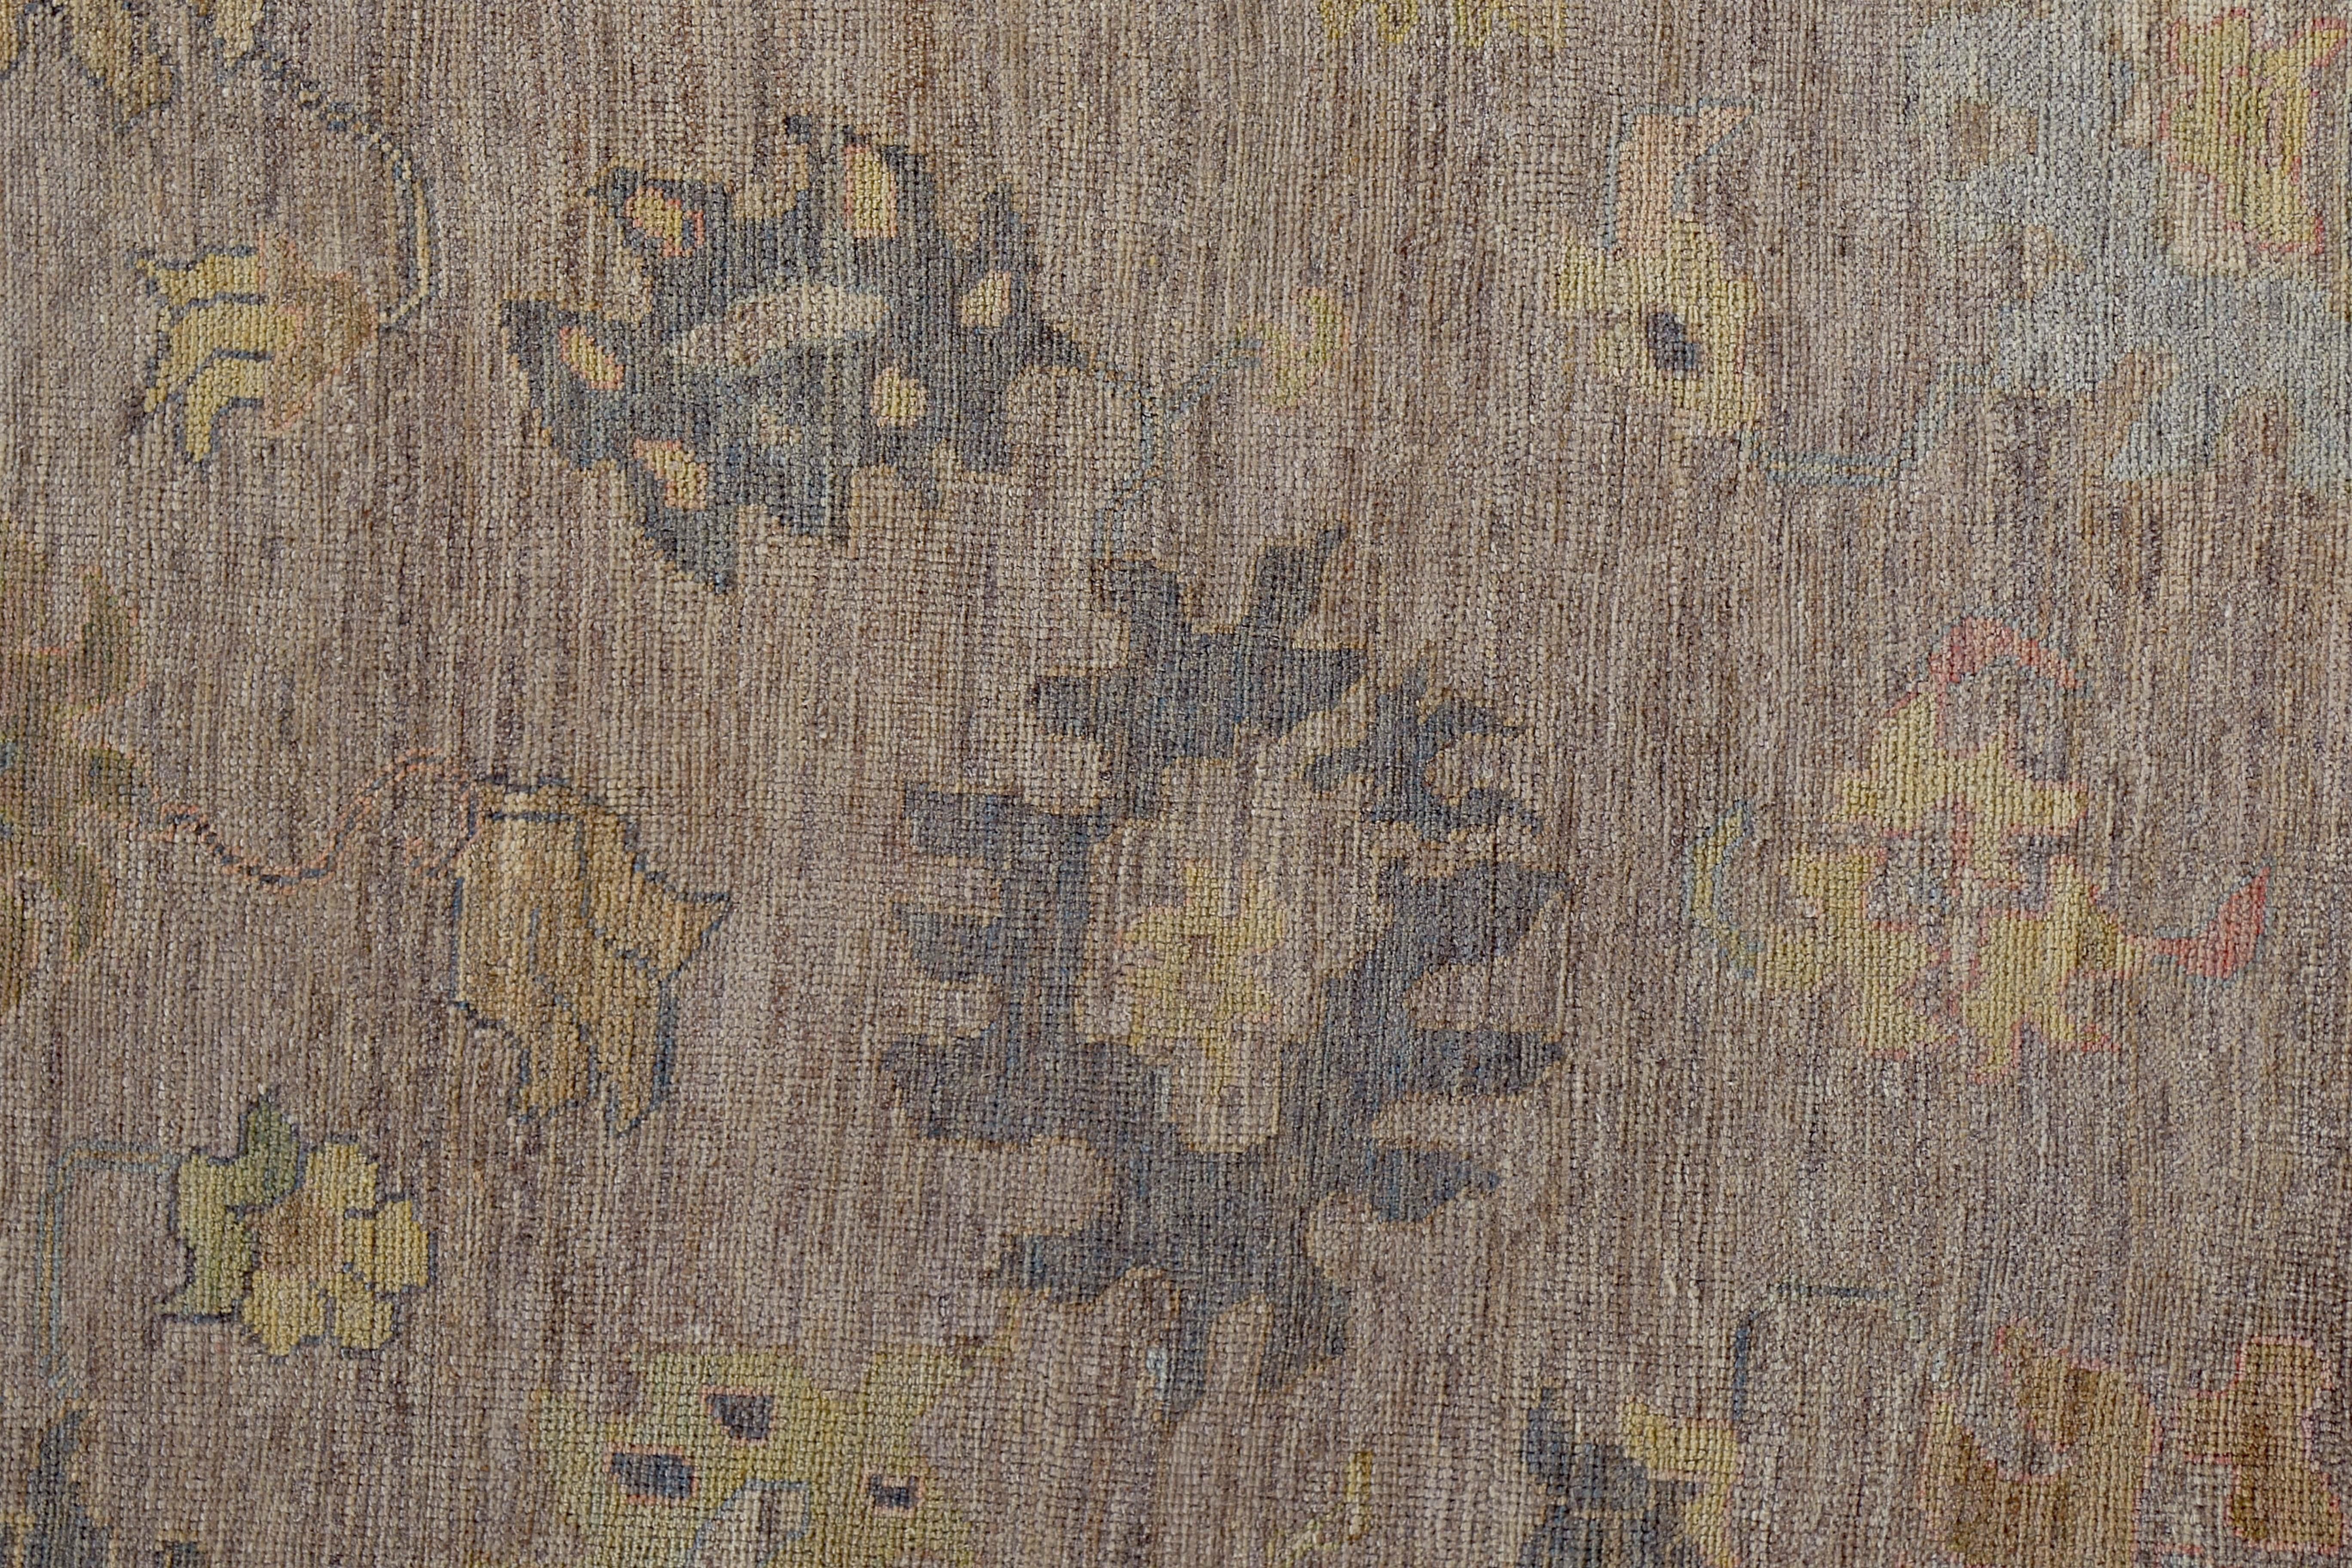 Hand-Woven Turkish Oushak Rug with Yellow, Blue and Green Flower Heads on Brown Field For Sale